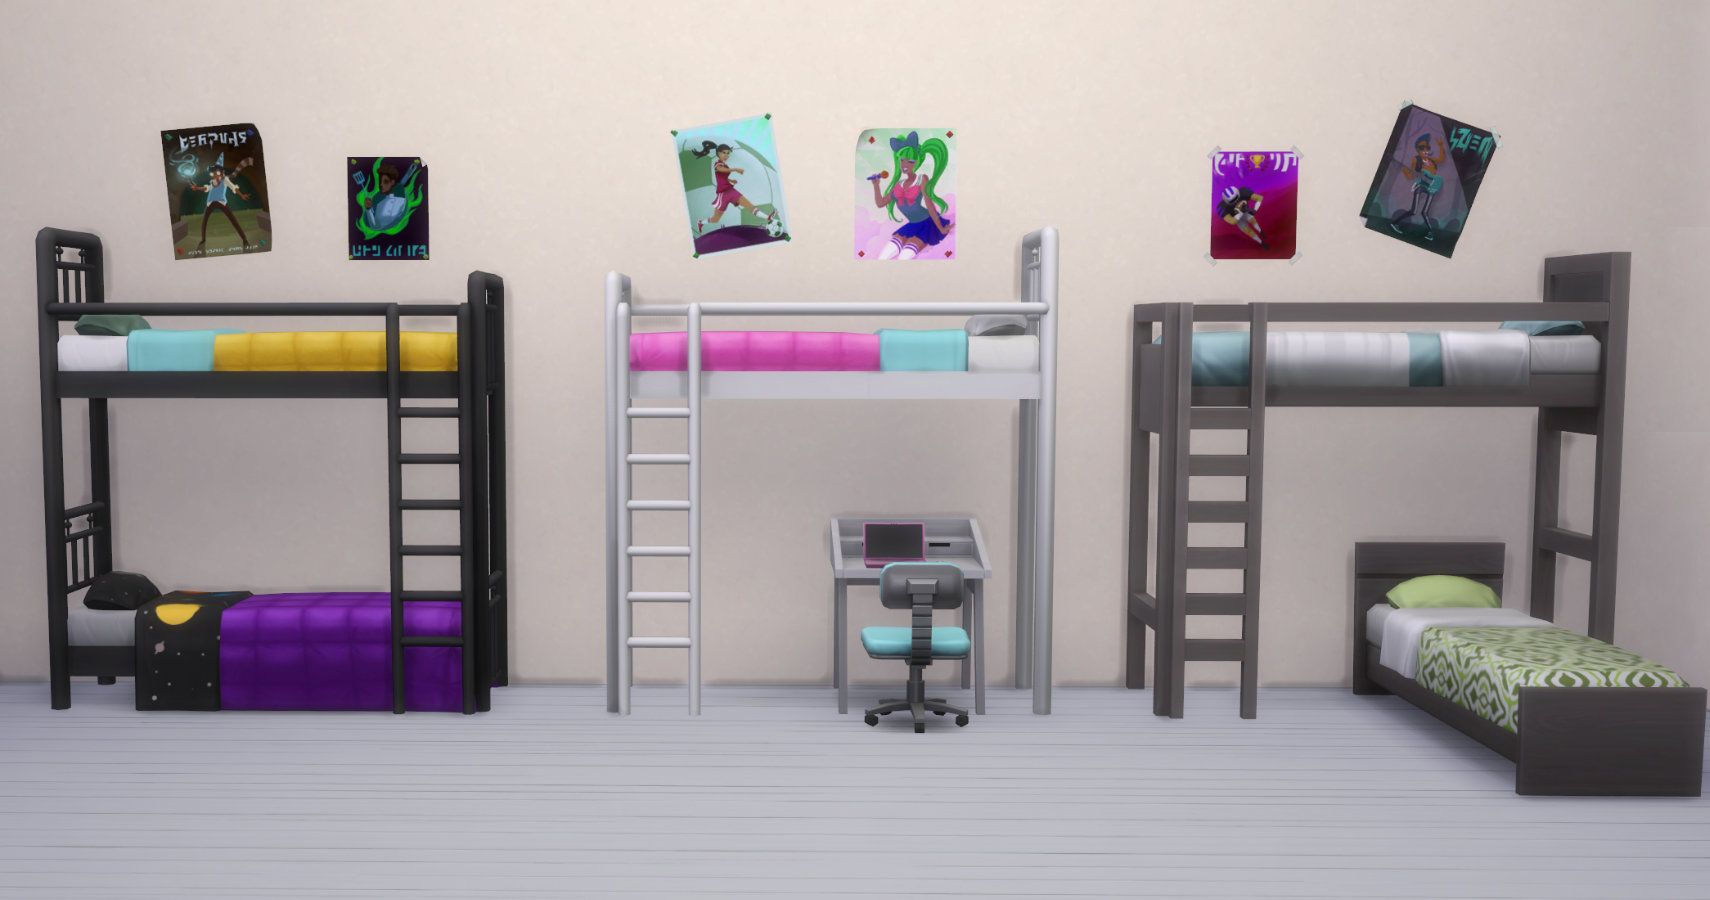 Sims 4 Free Update Adds Diverse Artwork Trait Enhancements And Bunk Beds